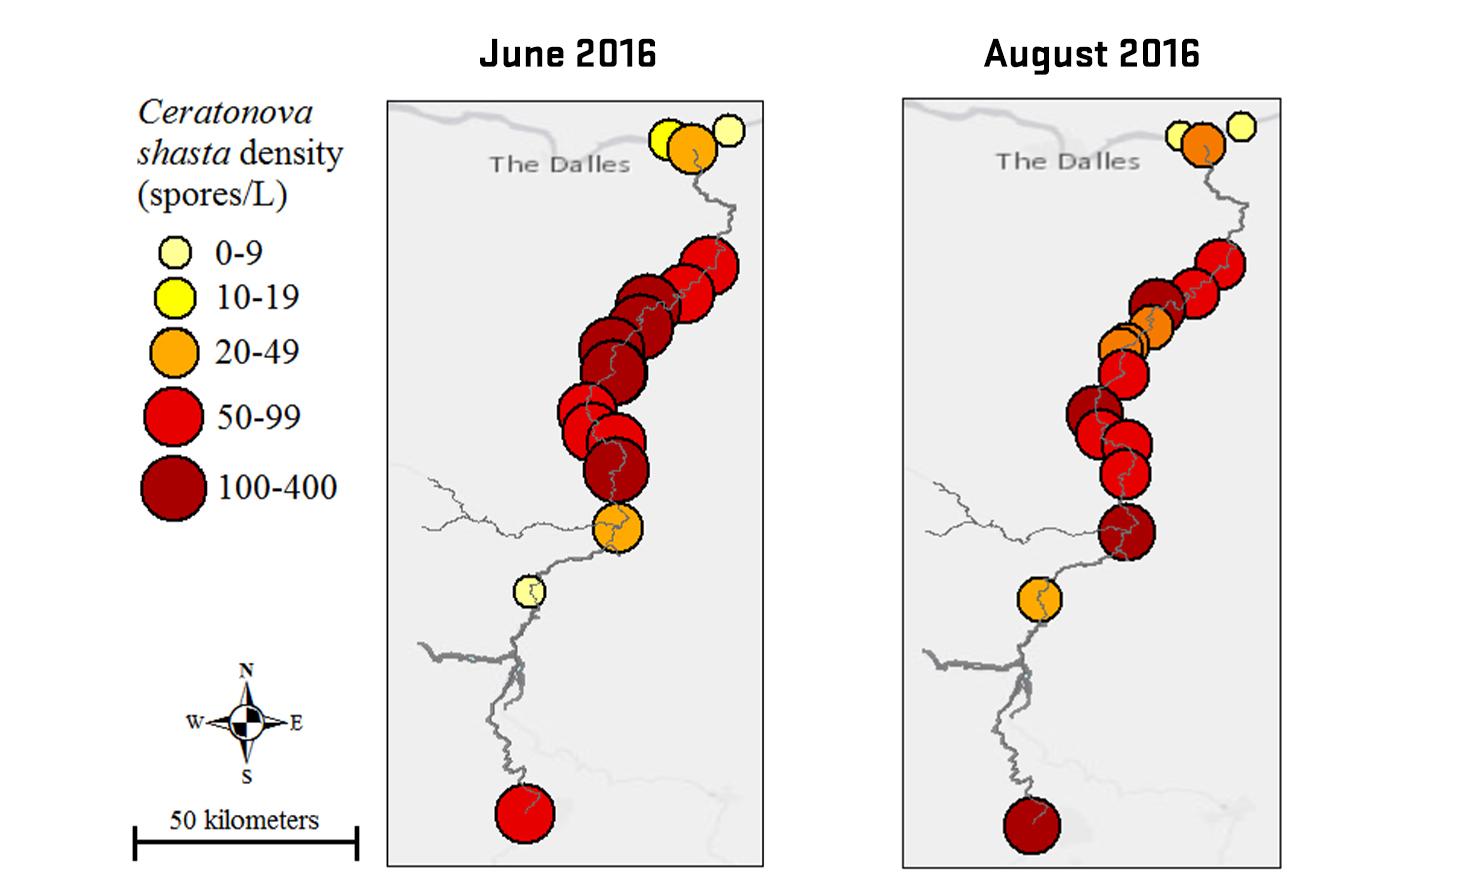 Two side-by-side maps of the Deschutes River labeled with Ceratonova shasta density (spores/L) by sample sites in red, orange and yellow. Comparing results from June and August 2016.